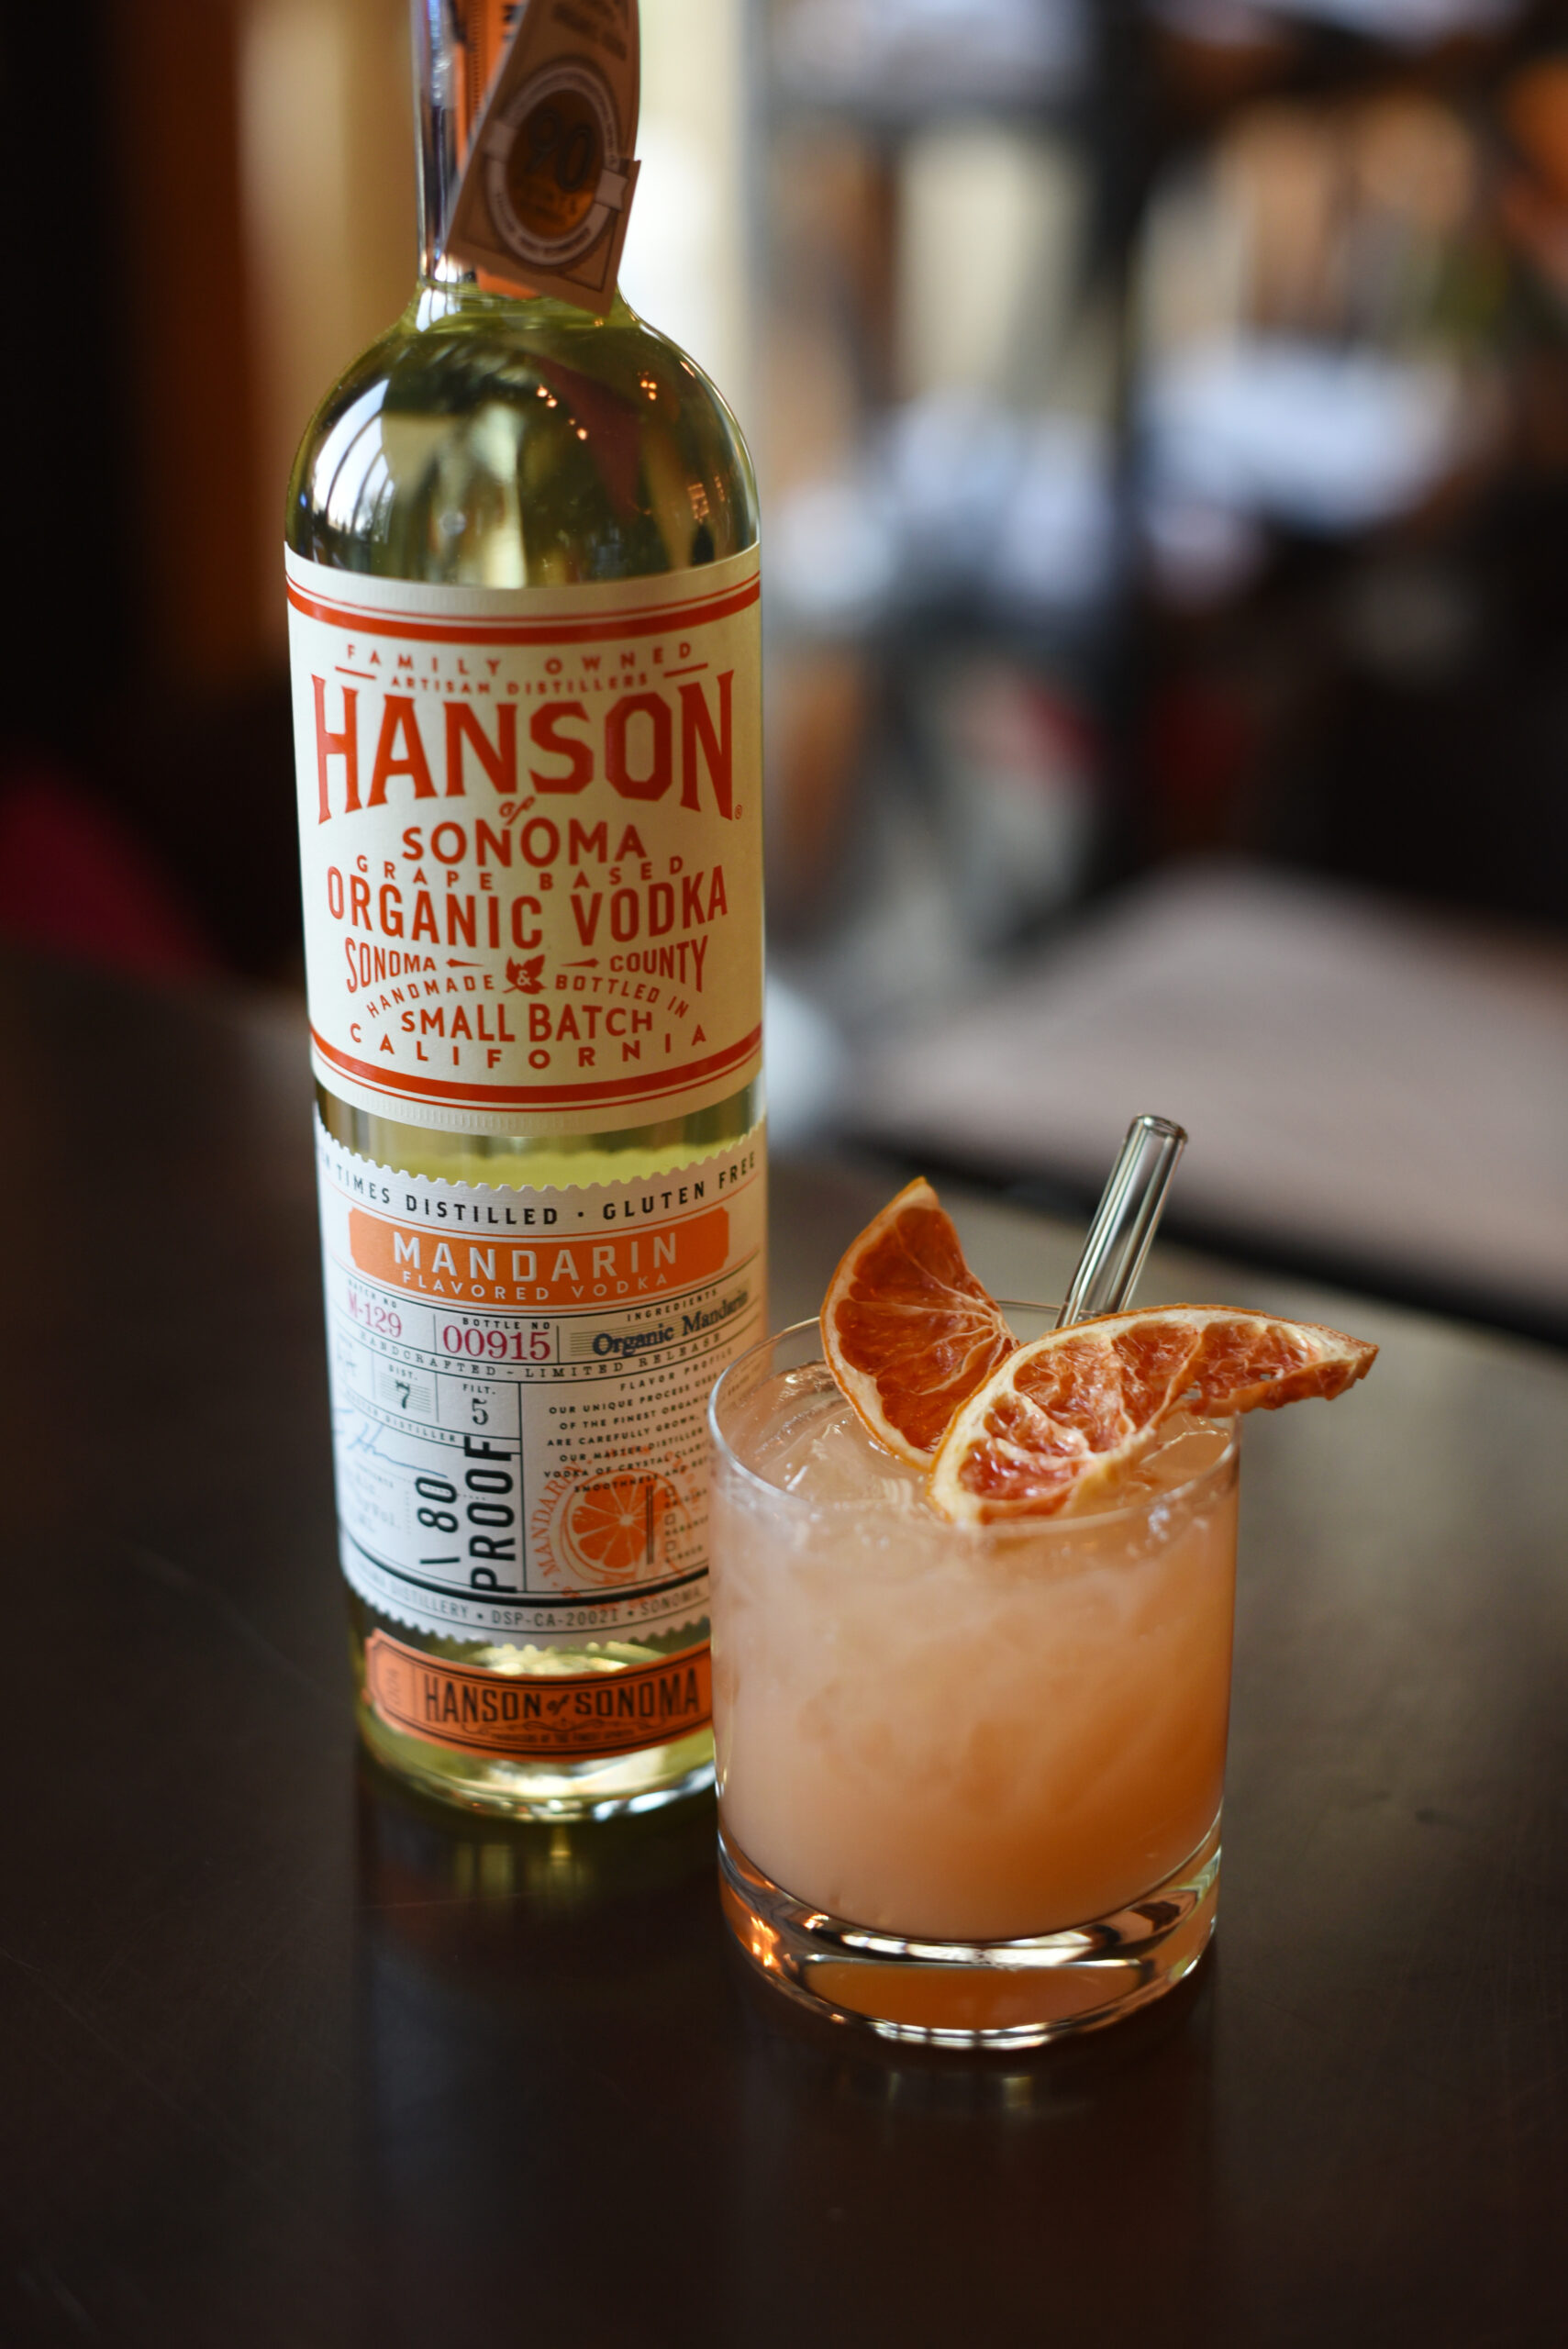 A Mandarin Greyhouse made with Hanson Organic Mandarin Vodka and garnished with a dehydrated grapefruit peel at Hanson of Sonoma Distillery in Sonoma, Calif. on Wednesday, February 24, 2021. (Photo: Erik Castro/for The Press Democrat)